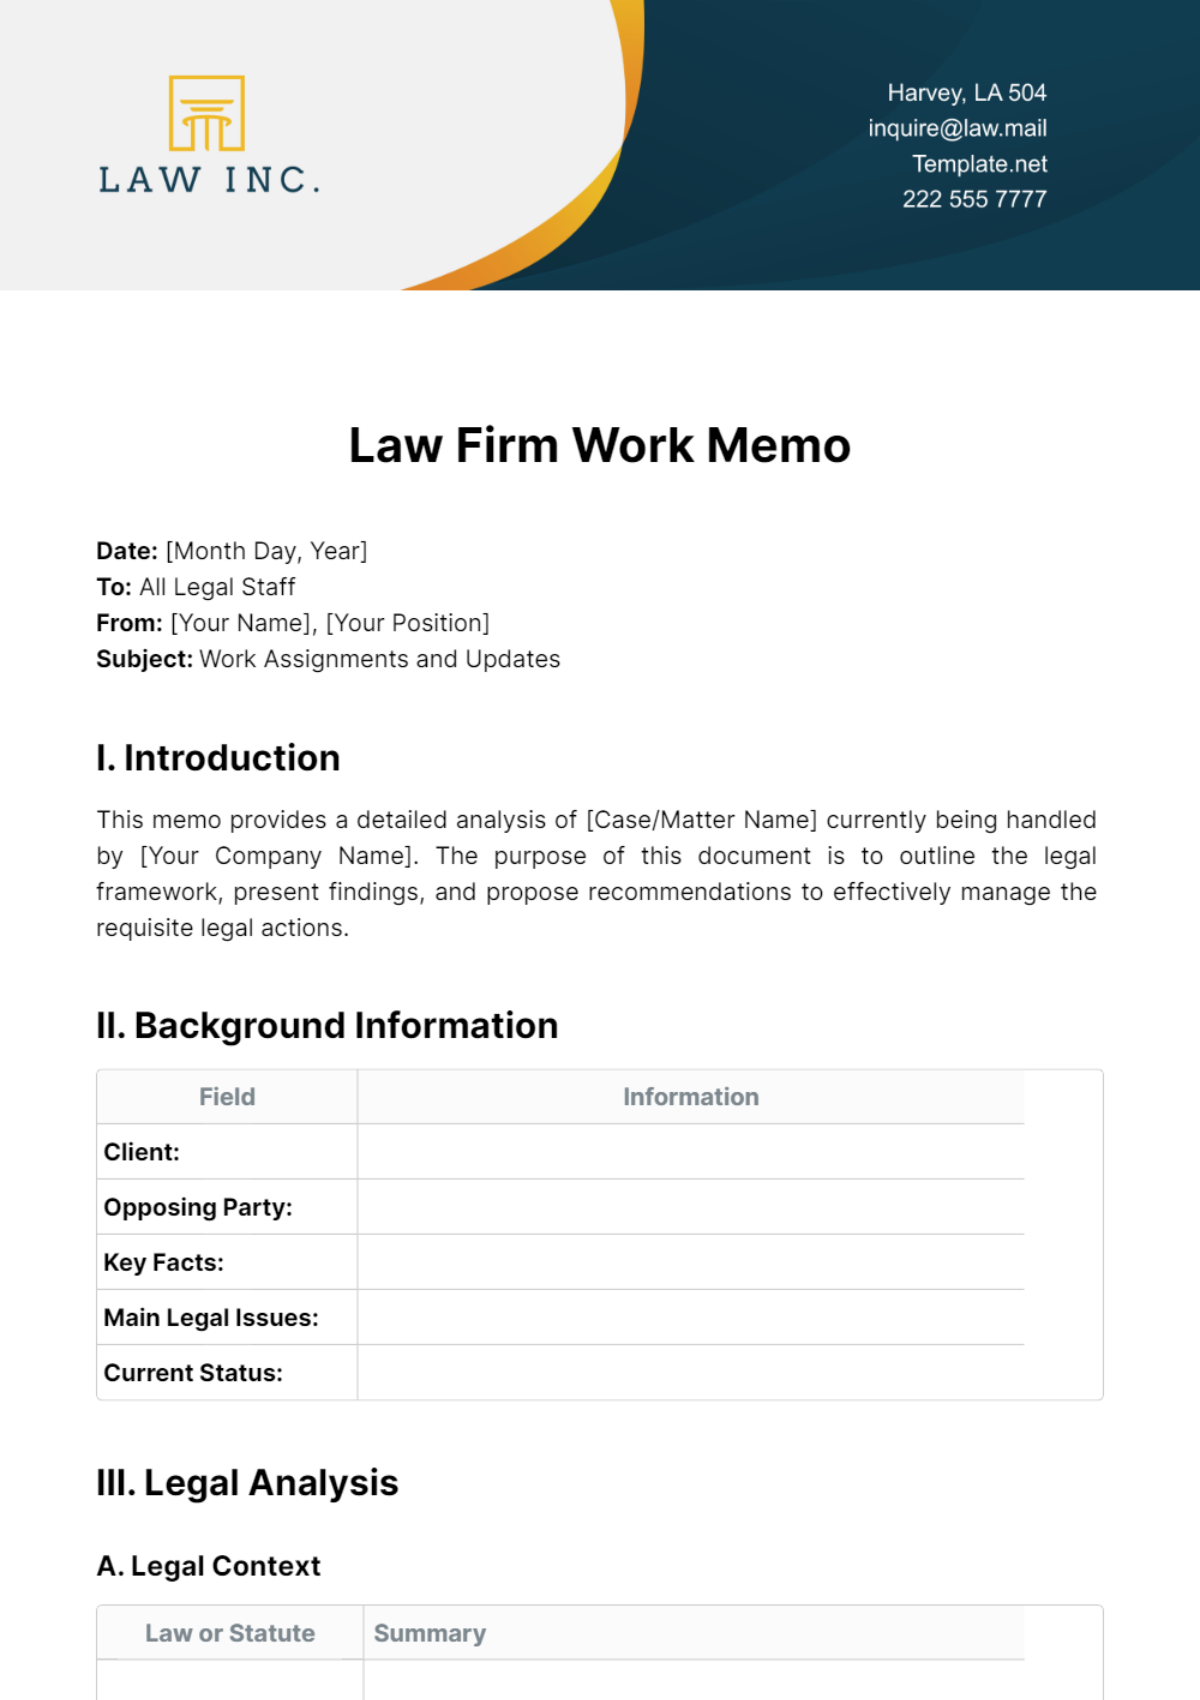 Free Law Firm Work Memo Template